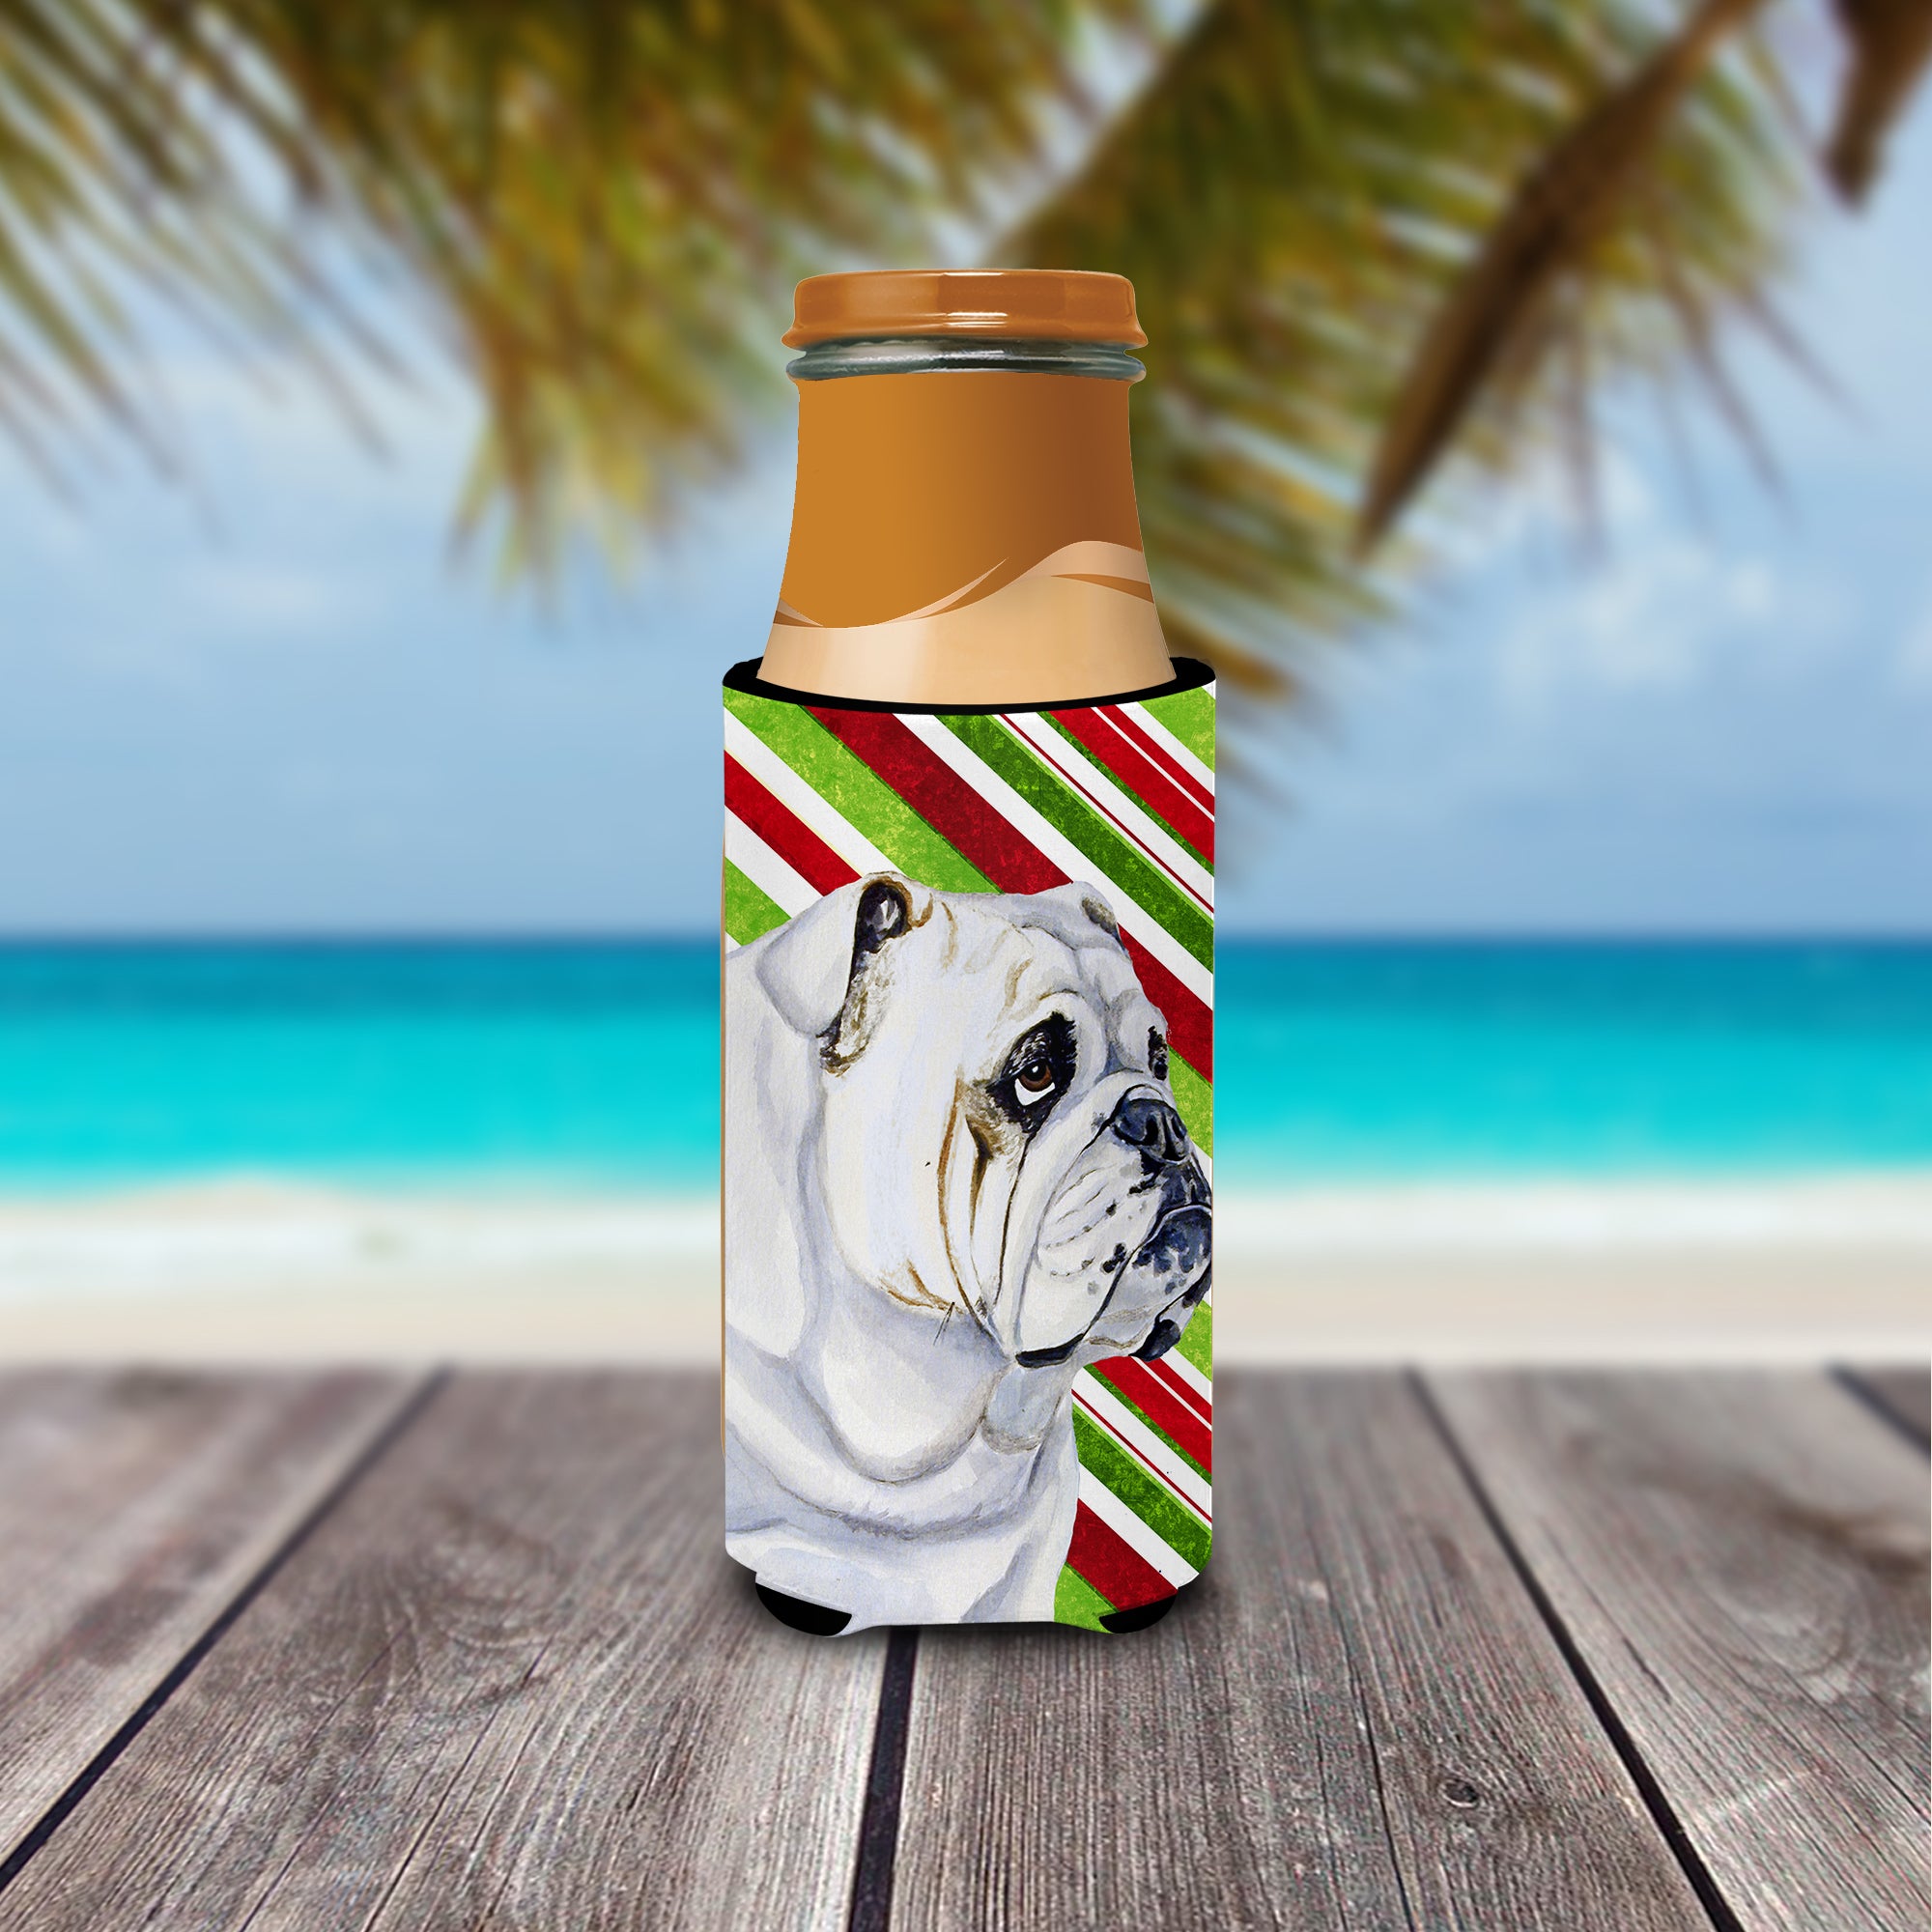 Bulldog English Candy Cane Holiday Christmas Ultra Beverage Insulators for slim cans LH9229MUK.